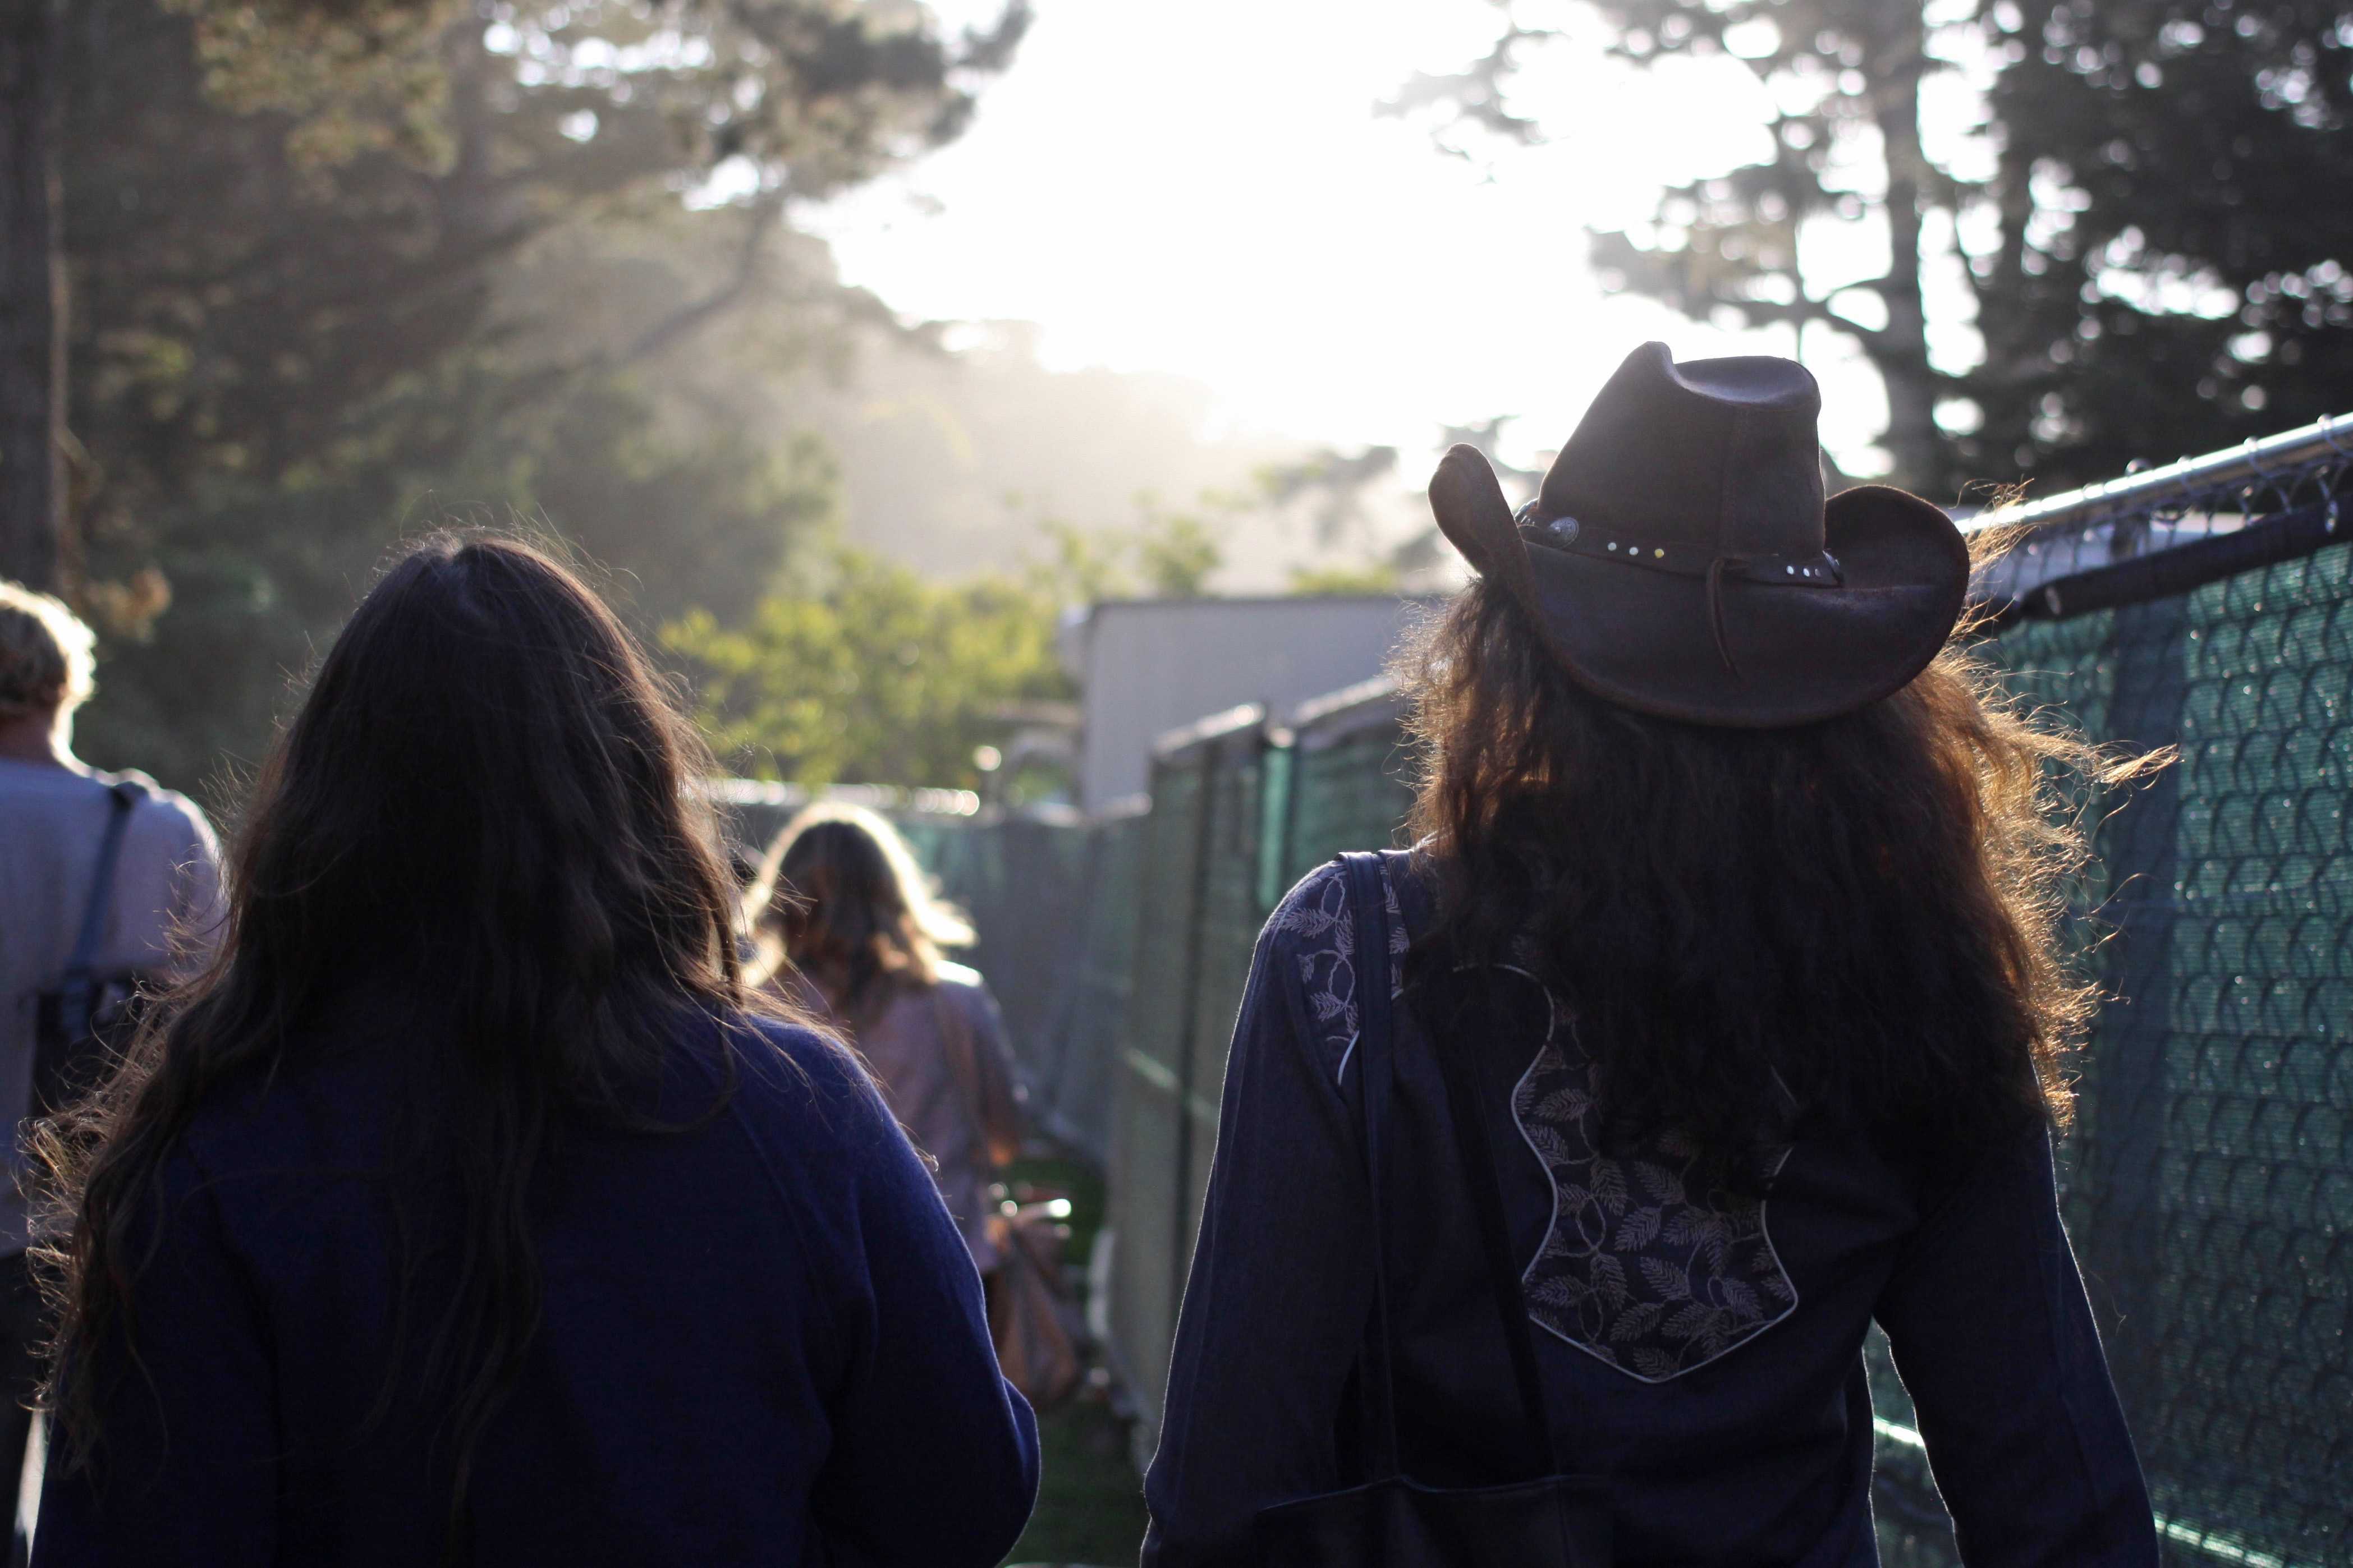 Hardly+Strictly+Bluegrass+Festival+brings+crowds+of+all+ages